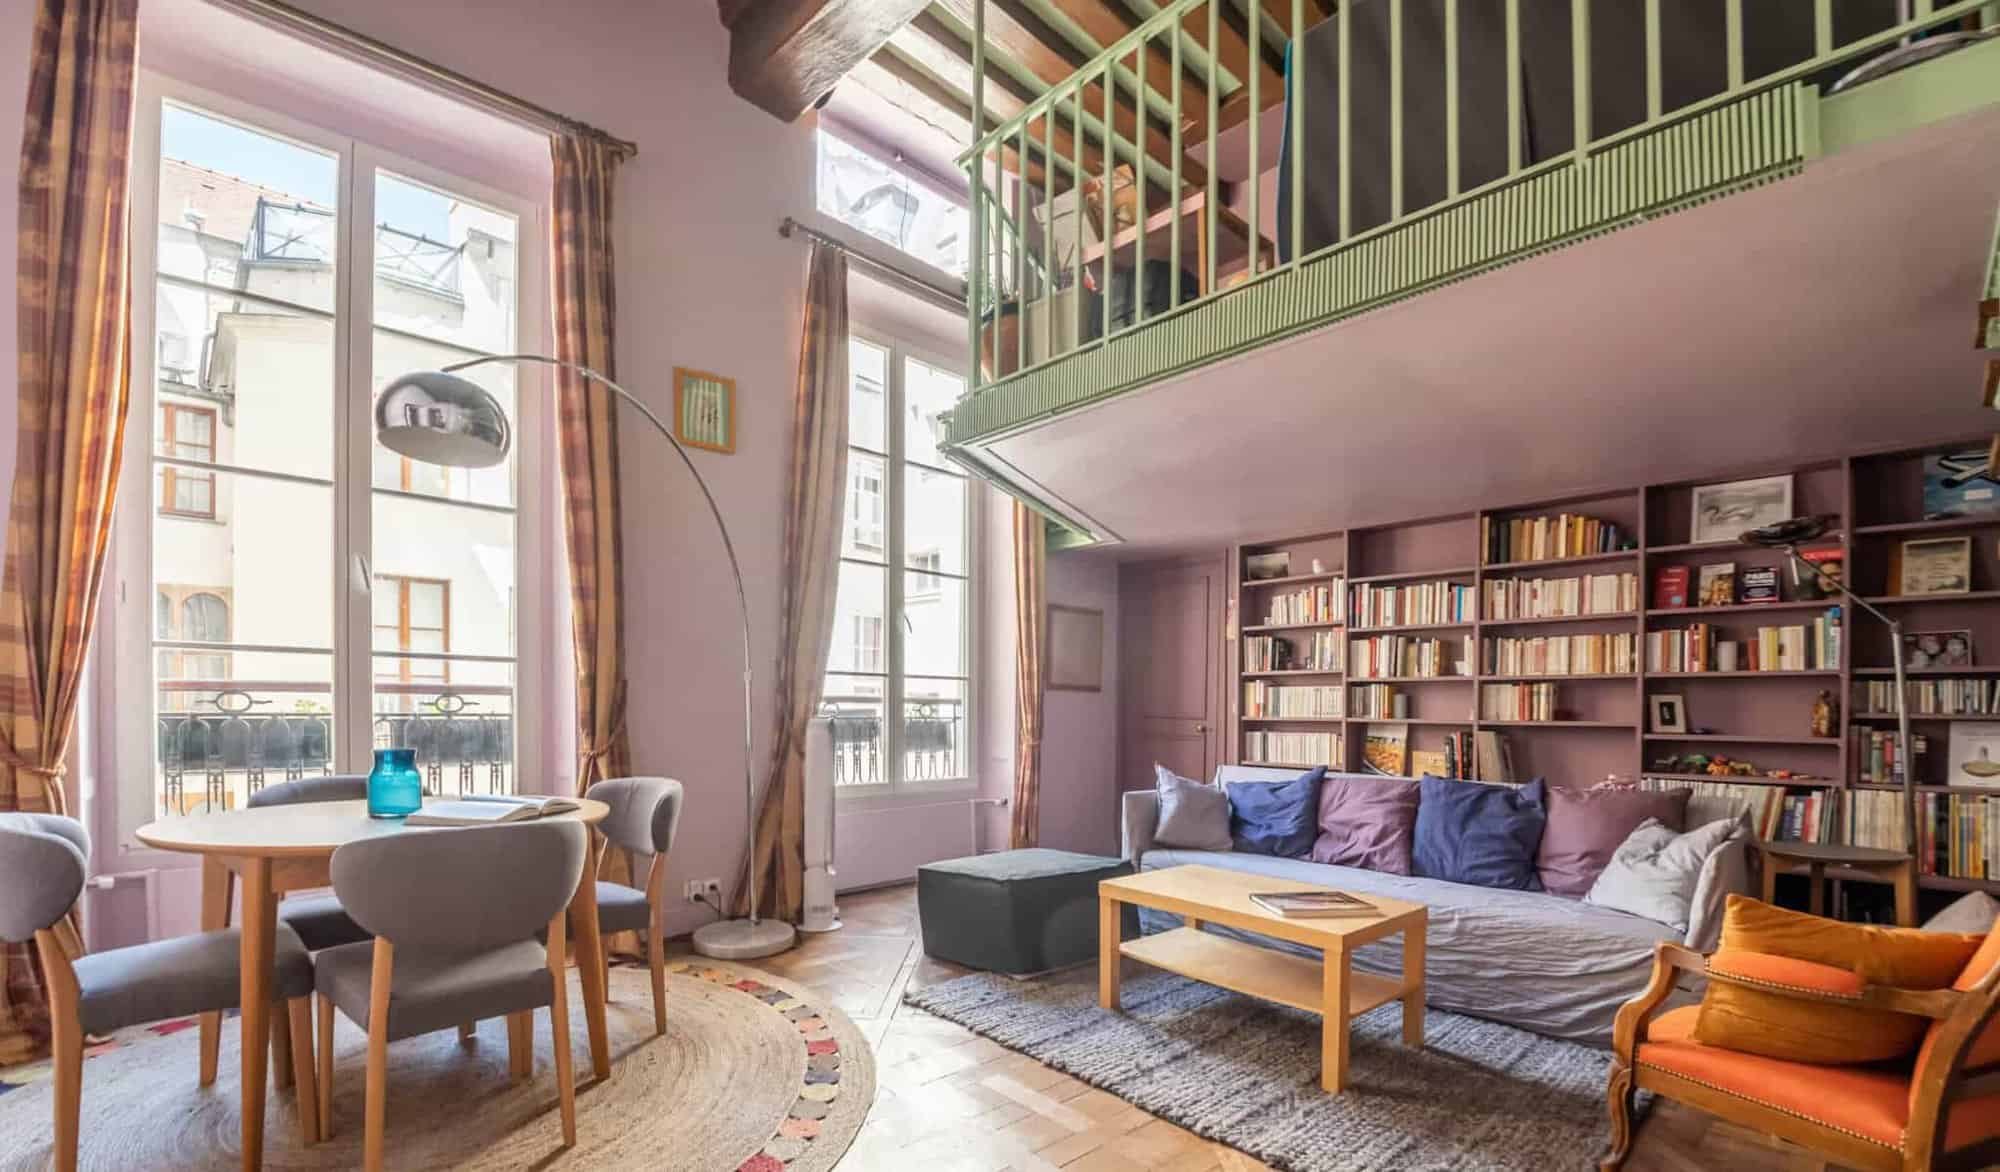 A Parisian loft apartment with purple walls, brown curtains, and gray chairs. 